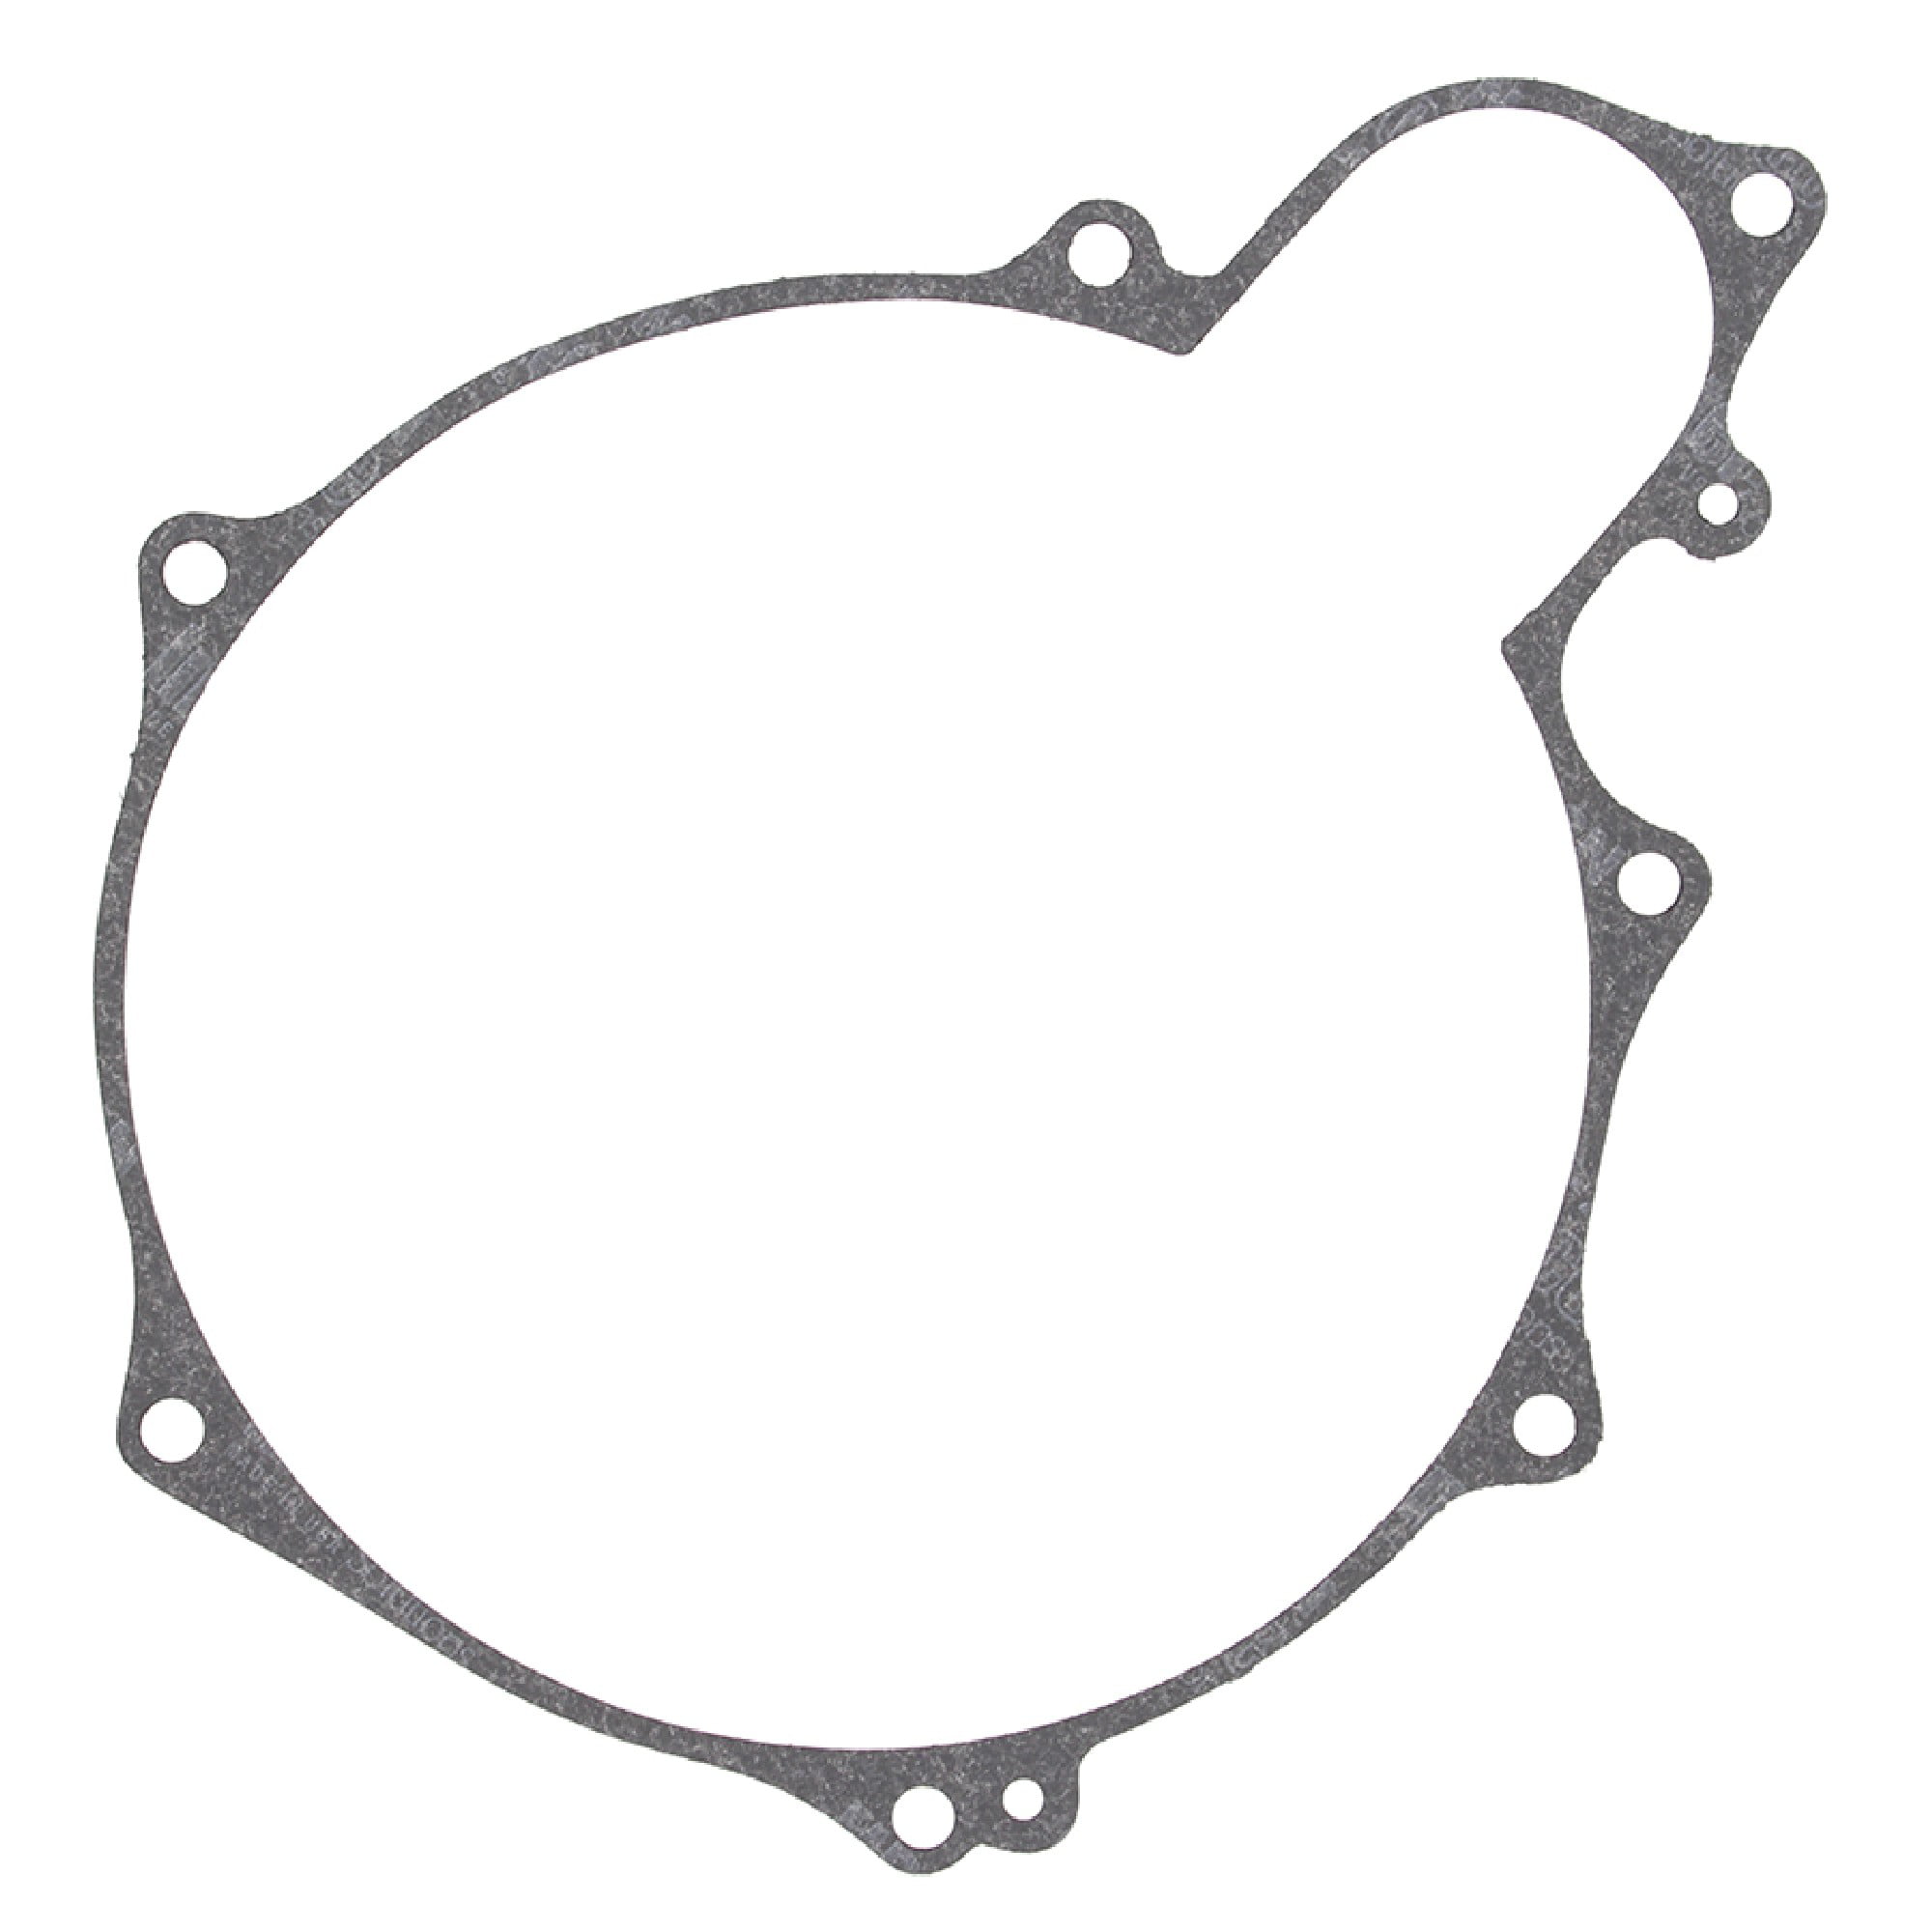 Clutch Cover Gasket For 1997 Yamaha YZ250 Offroad Motorcycle Winderosa 817645